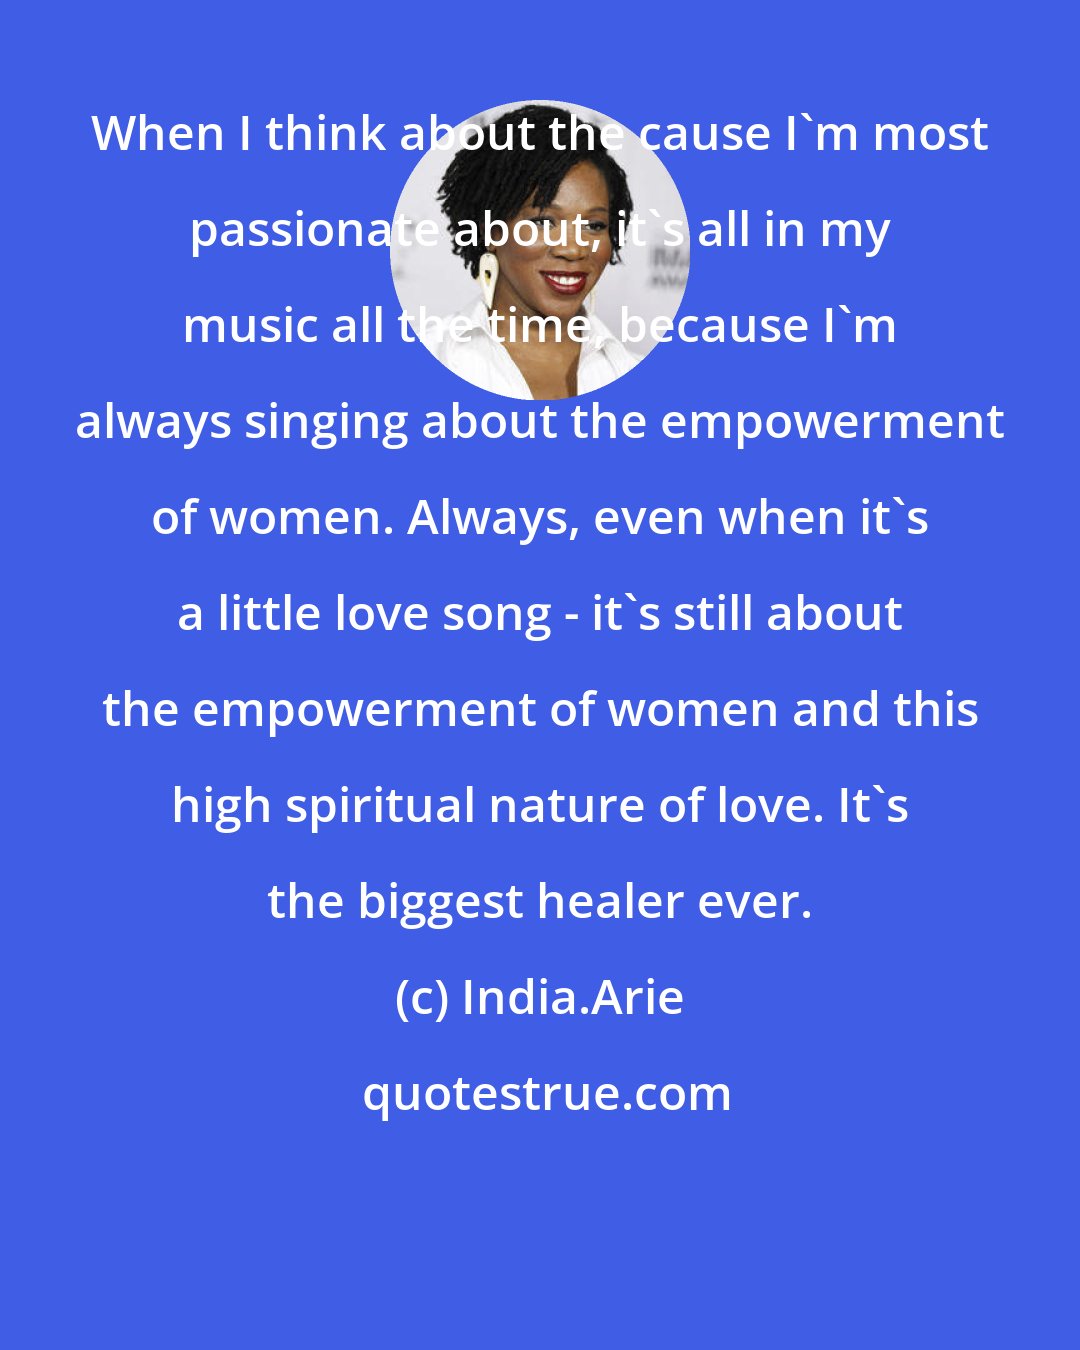 India.Arie: When I think about the cause I'm most passionate about, it's all in my music all the time, because I'm always singing about the empowerment of women. Always, even when it's a little love song - it's still about the empowerment of women and this high spiritual nature of love. It's the biggest healer ever.